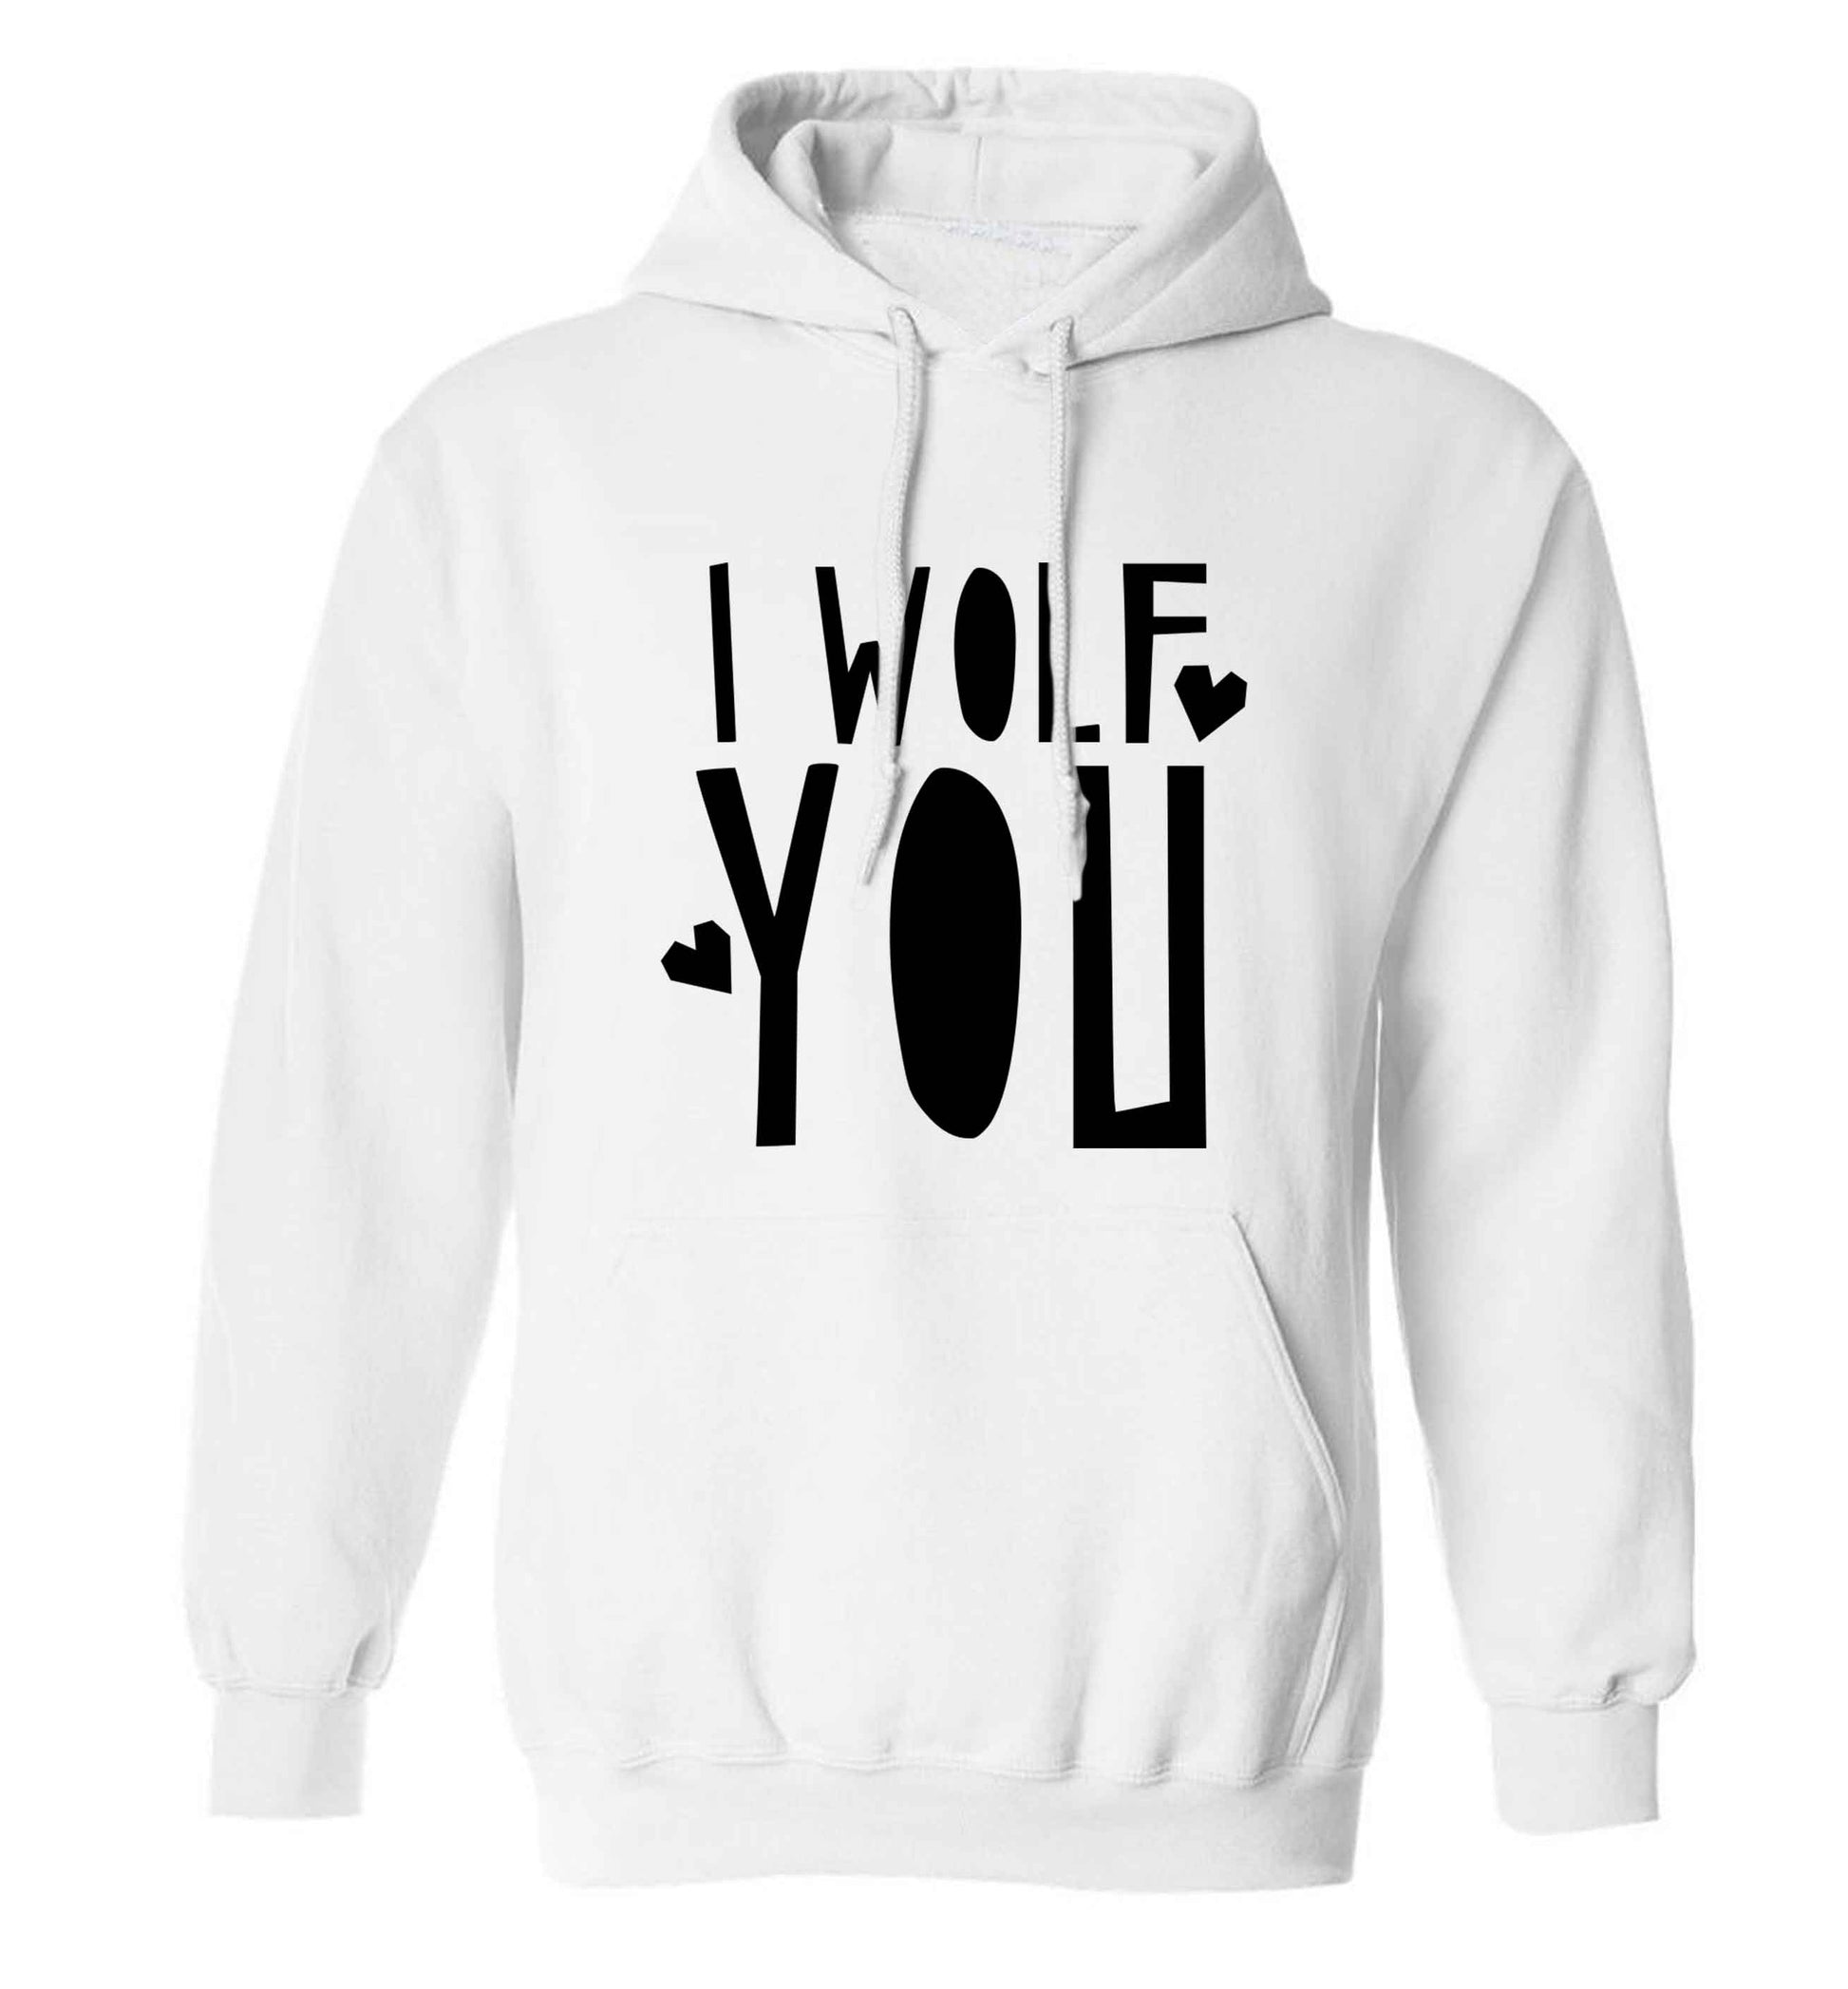 I wolf you adults unisex white hoodie 2XL